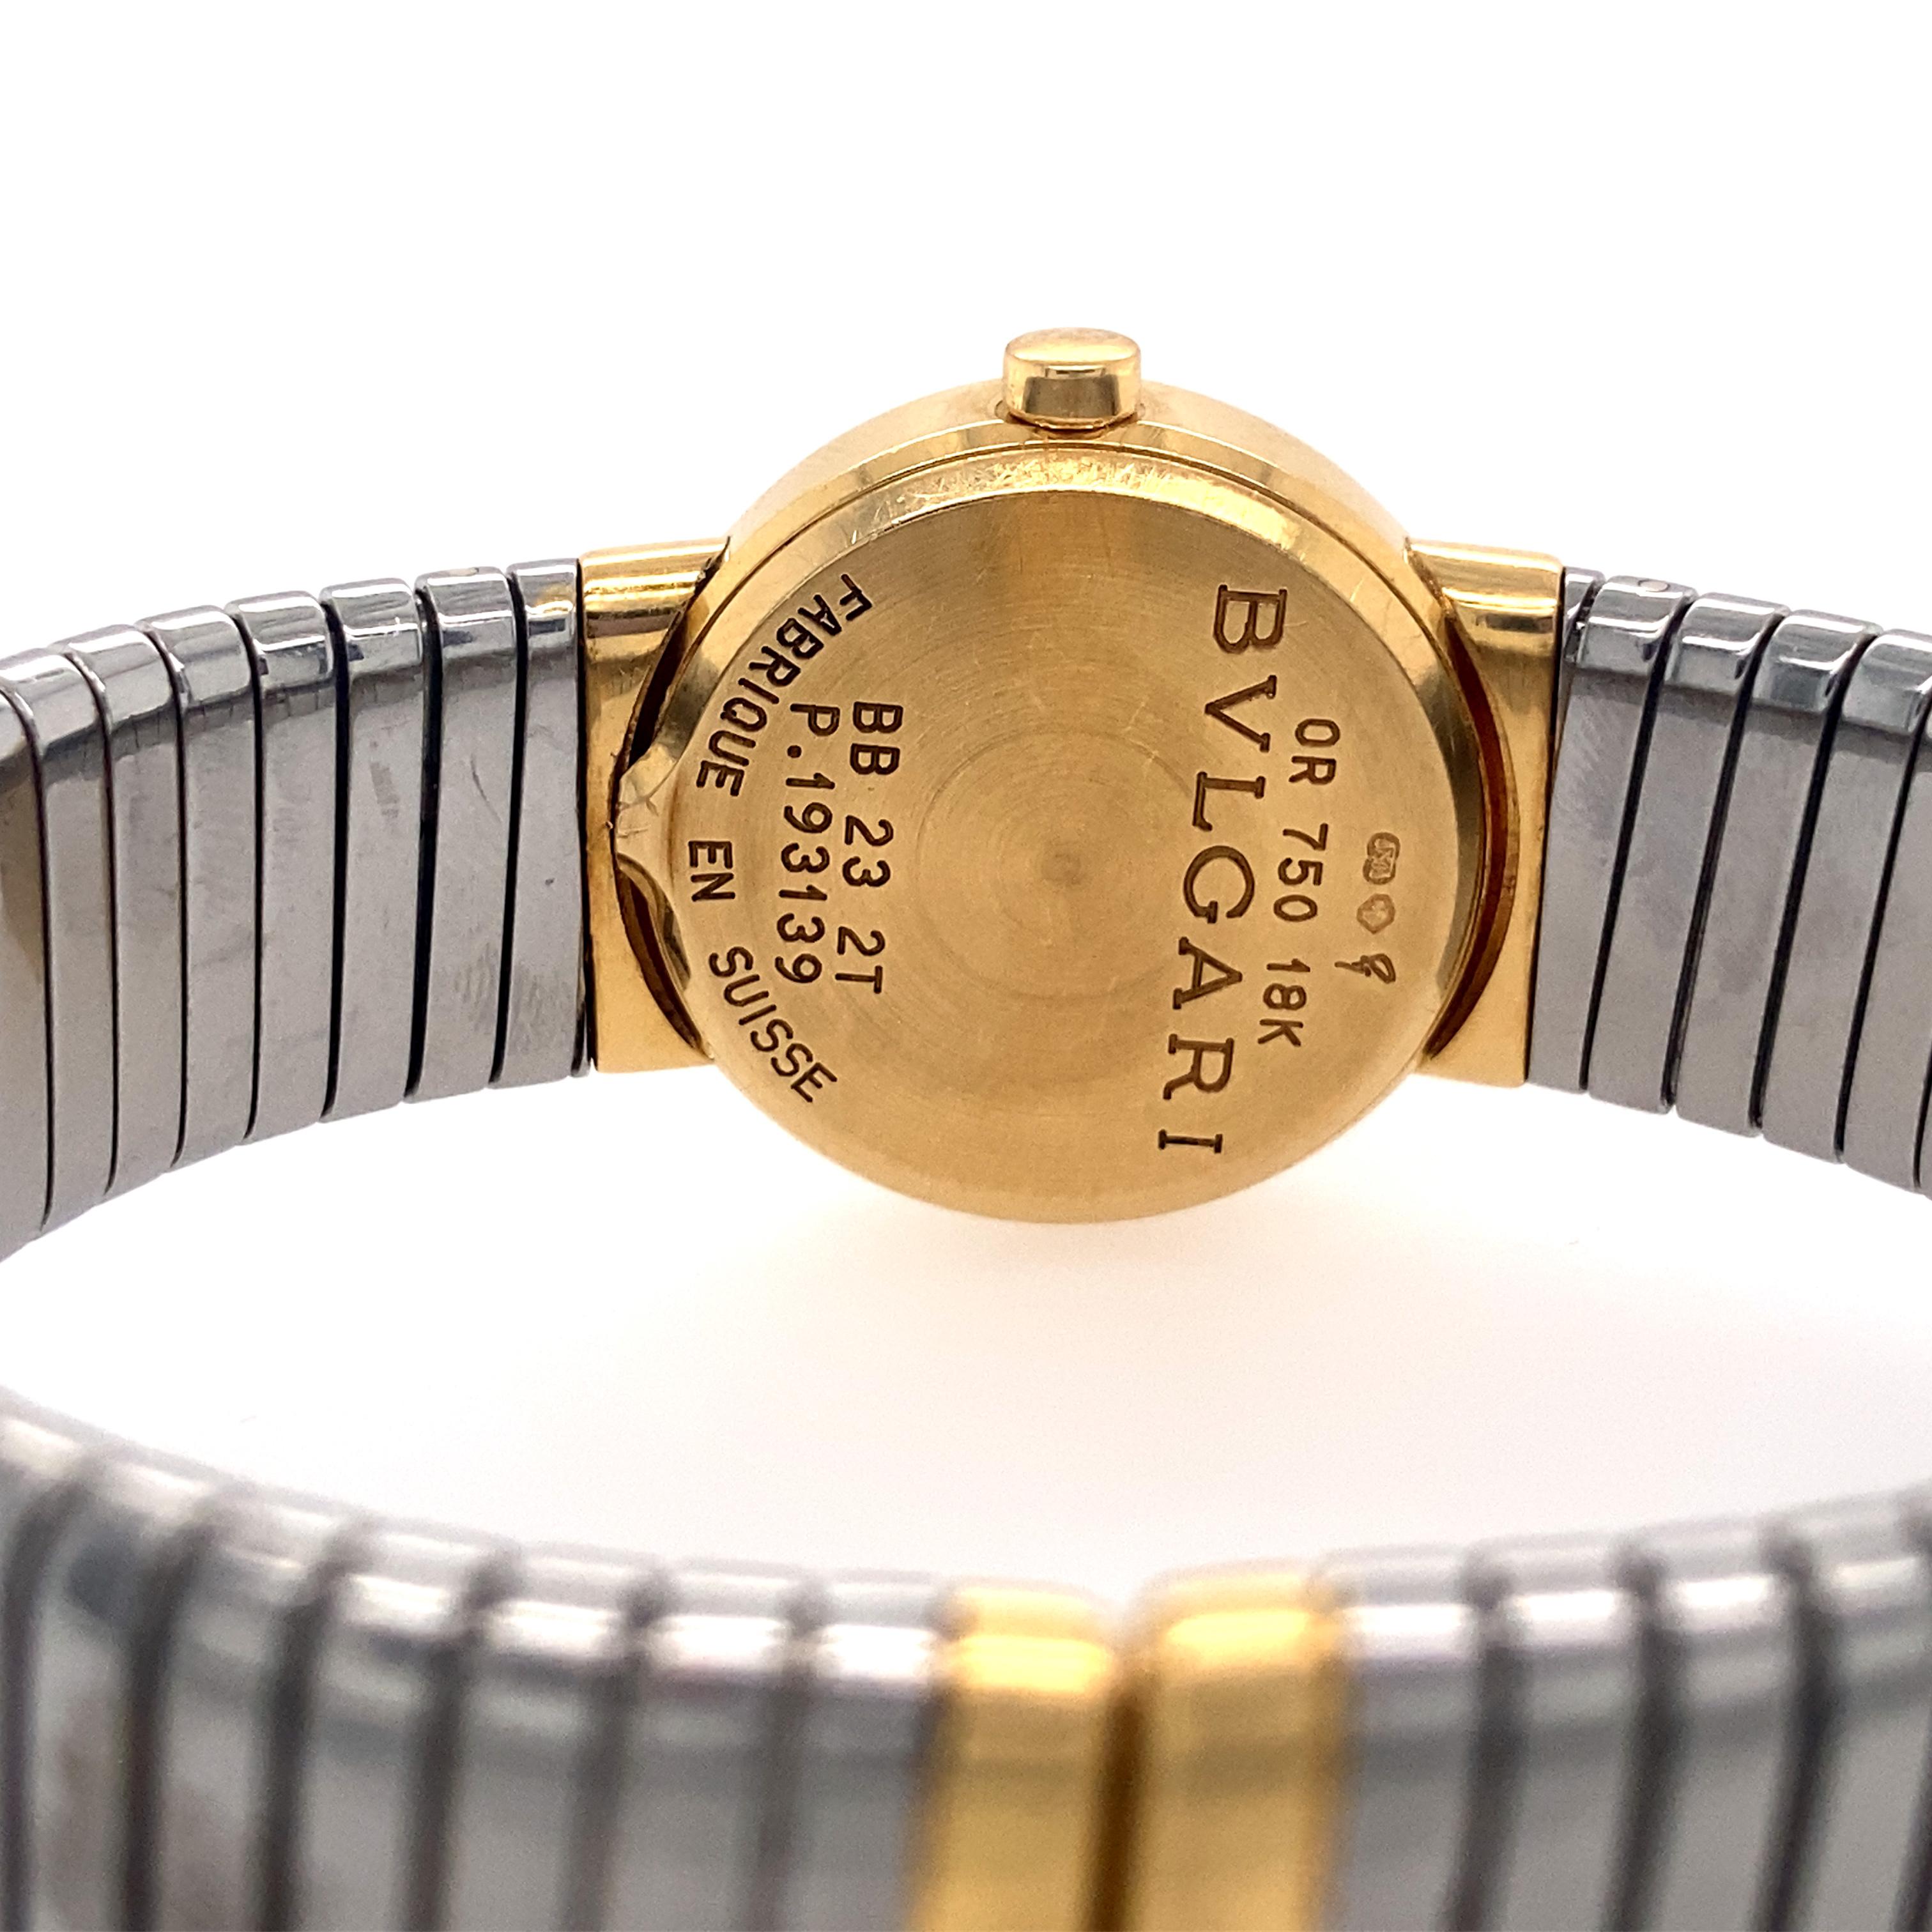 Bulgari Tubogas bracelet watch, featuring a Swiss-made quartz movement; black dial with gold hands and hour markers; and 23mm, 18k yellow gold and stainless steel case with an 18k yellow gold bezel on a 'Tubogas'-style, stainless steel tension